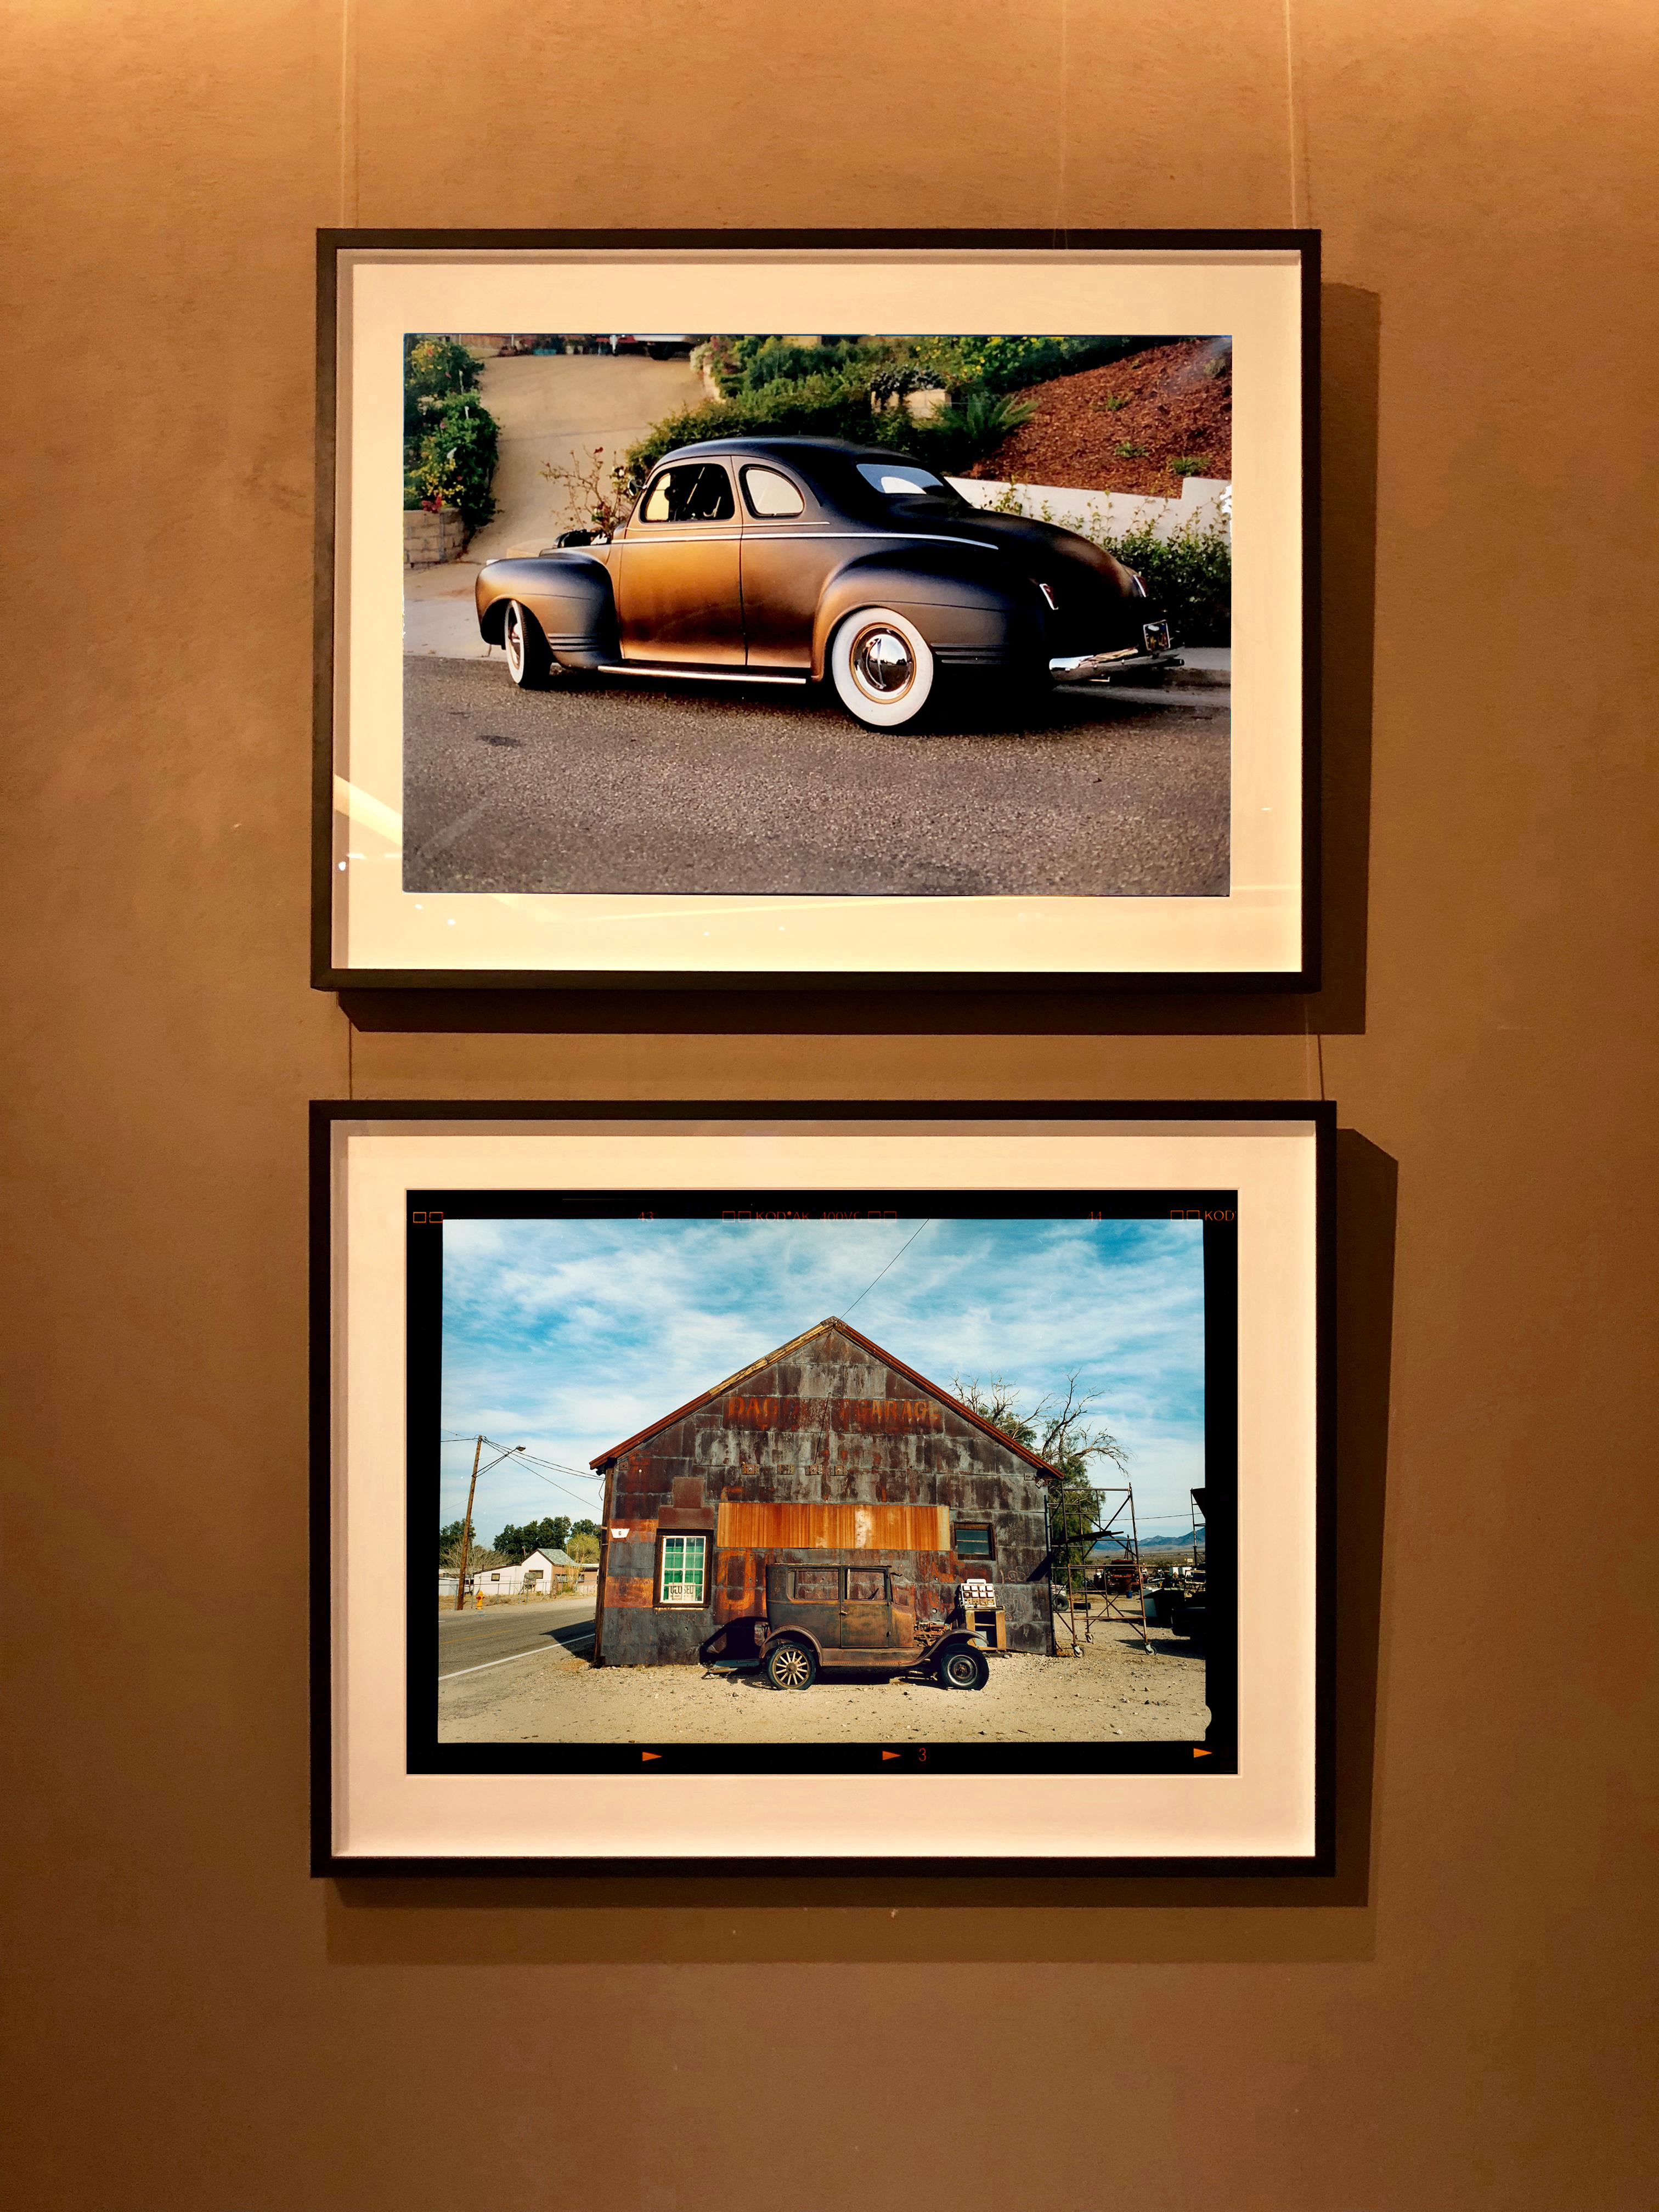 Model T and Garage, Daggett, California - Color Photography For Sale 4